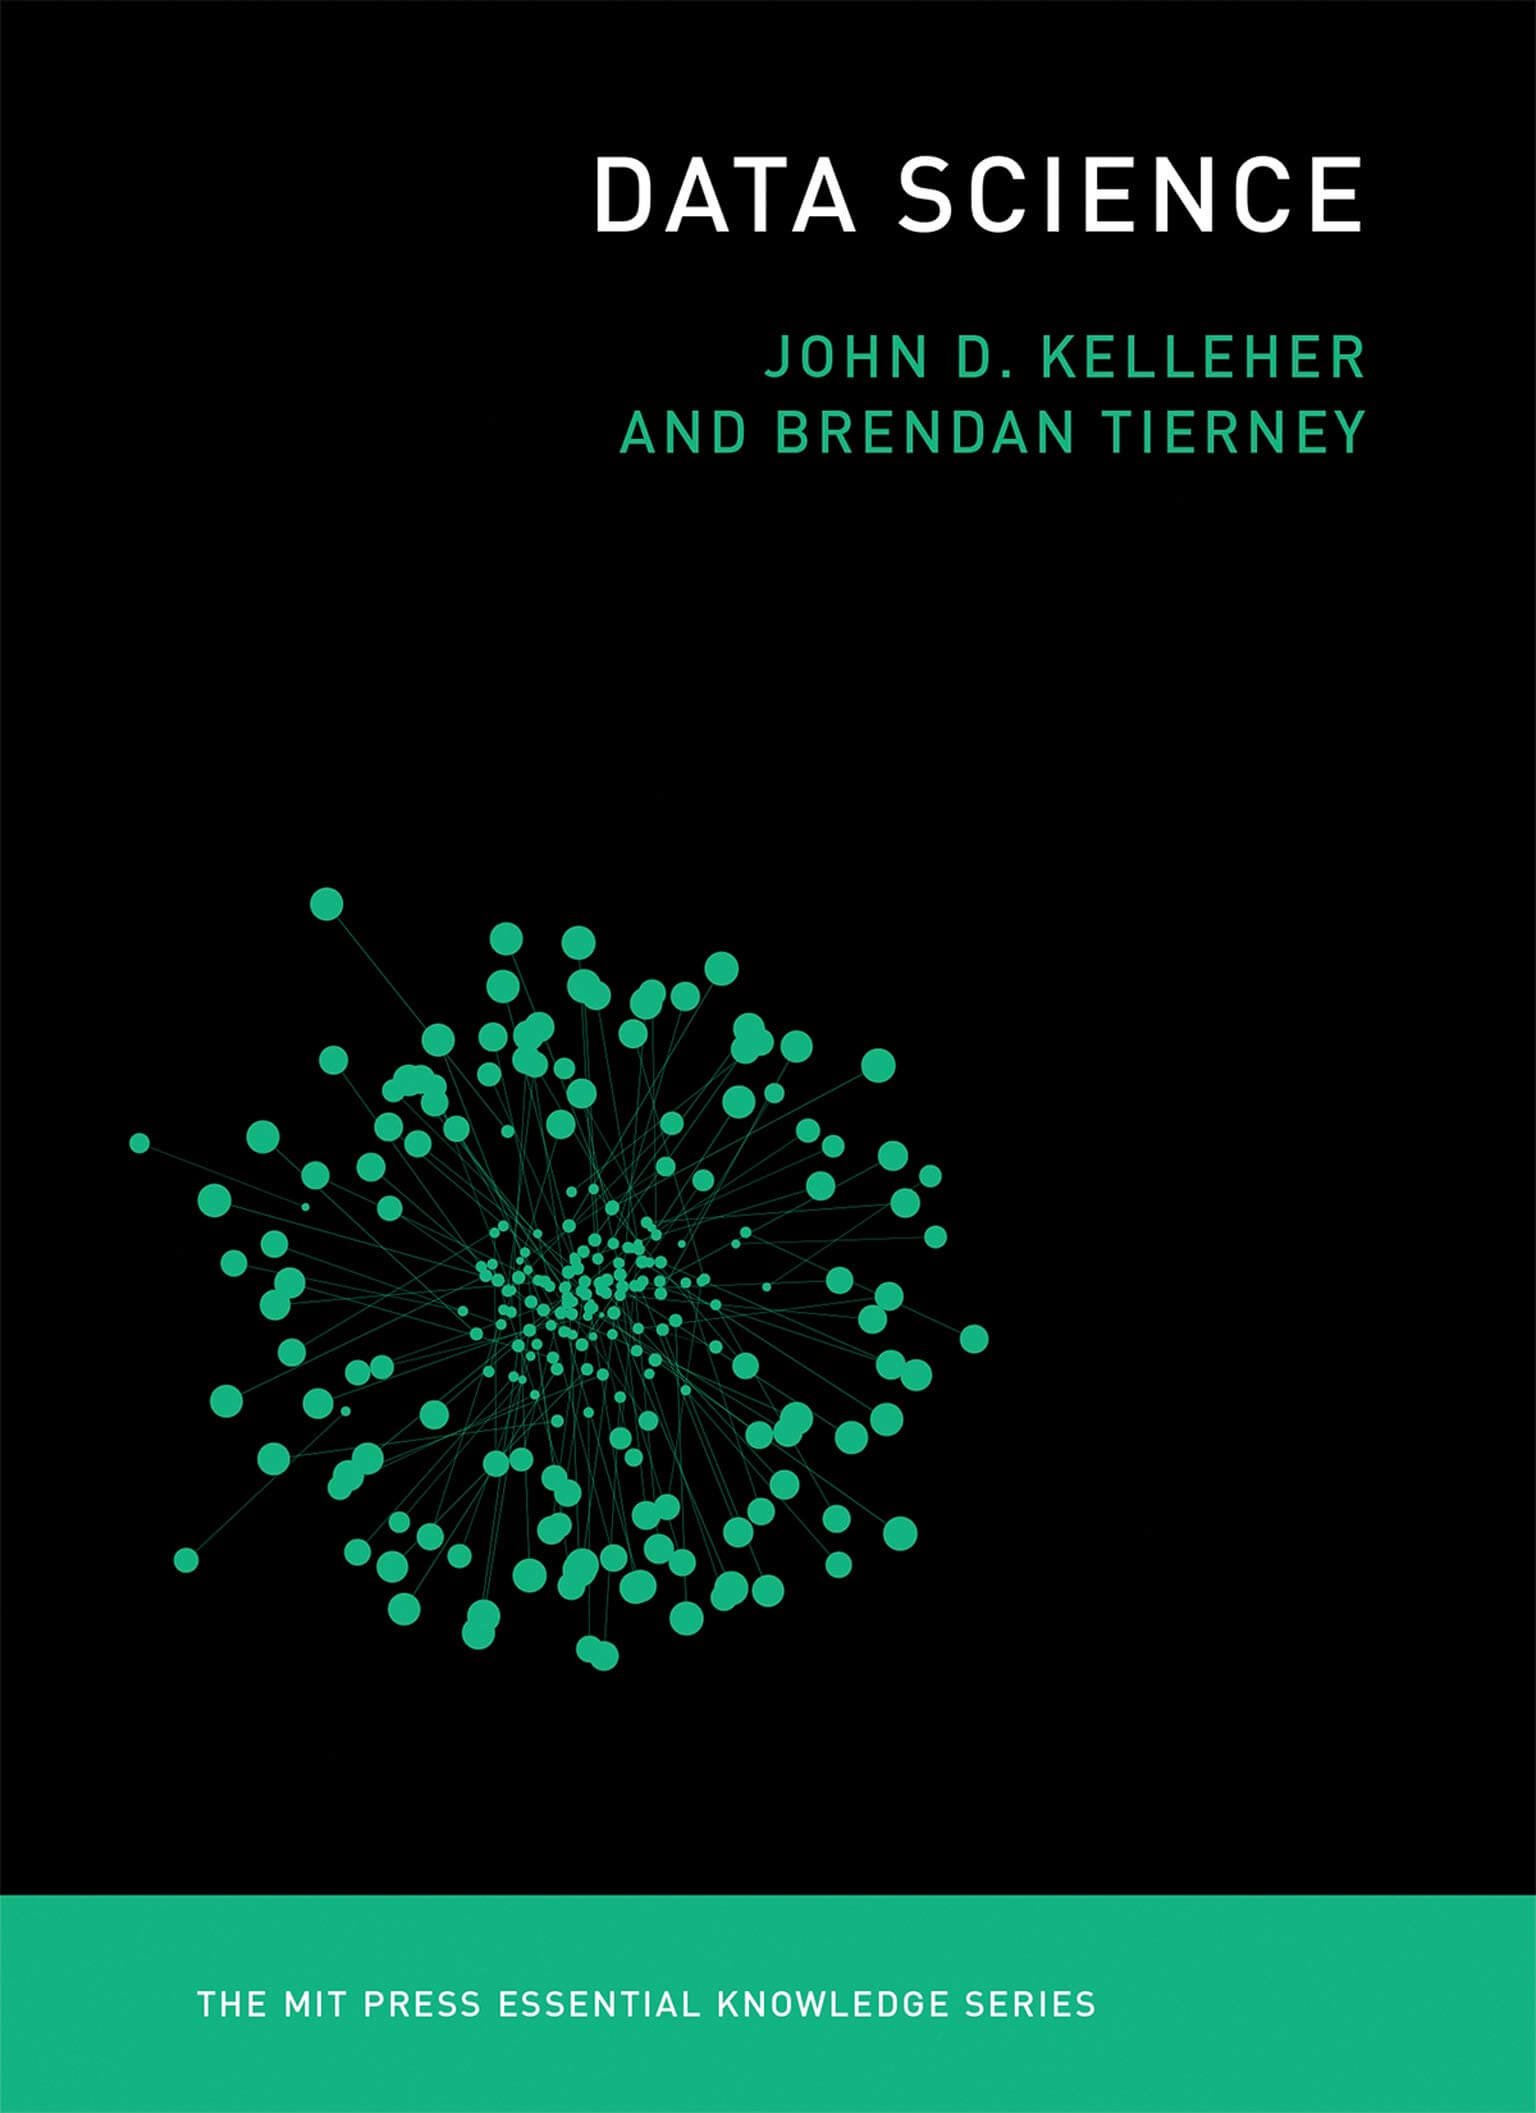 Data Science (The MIT Press Essential Knowledge series) Book